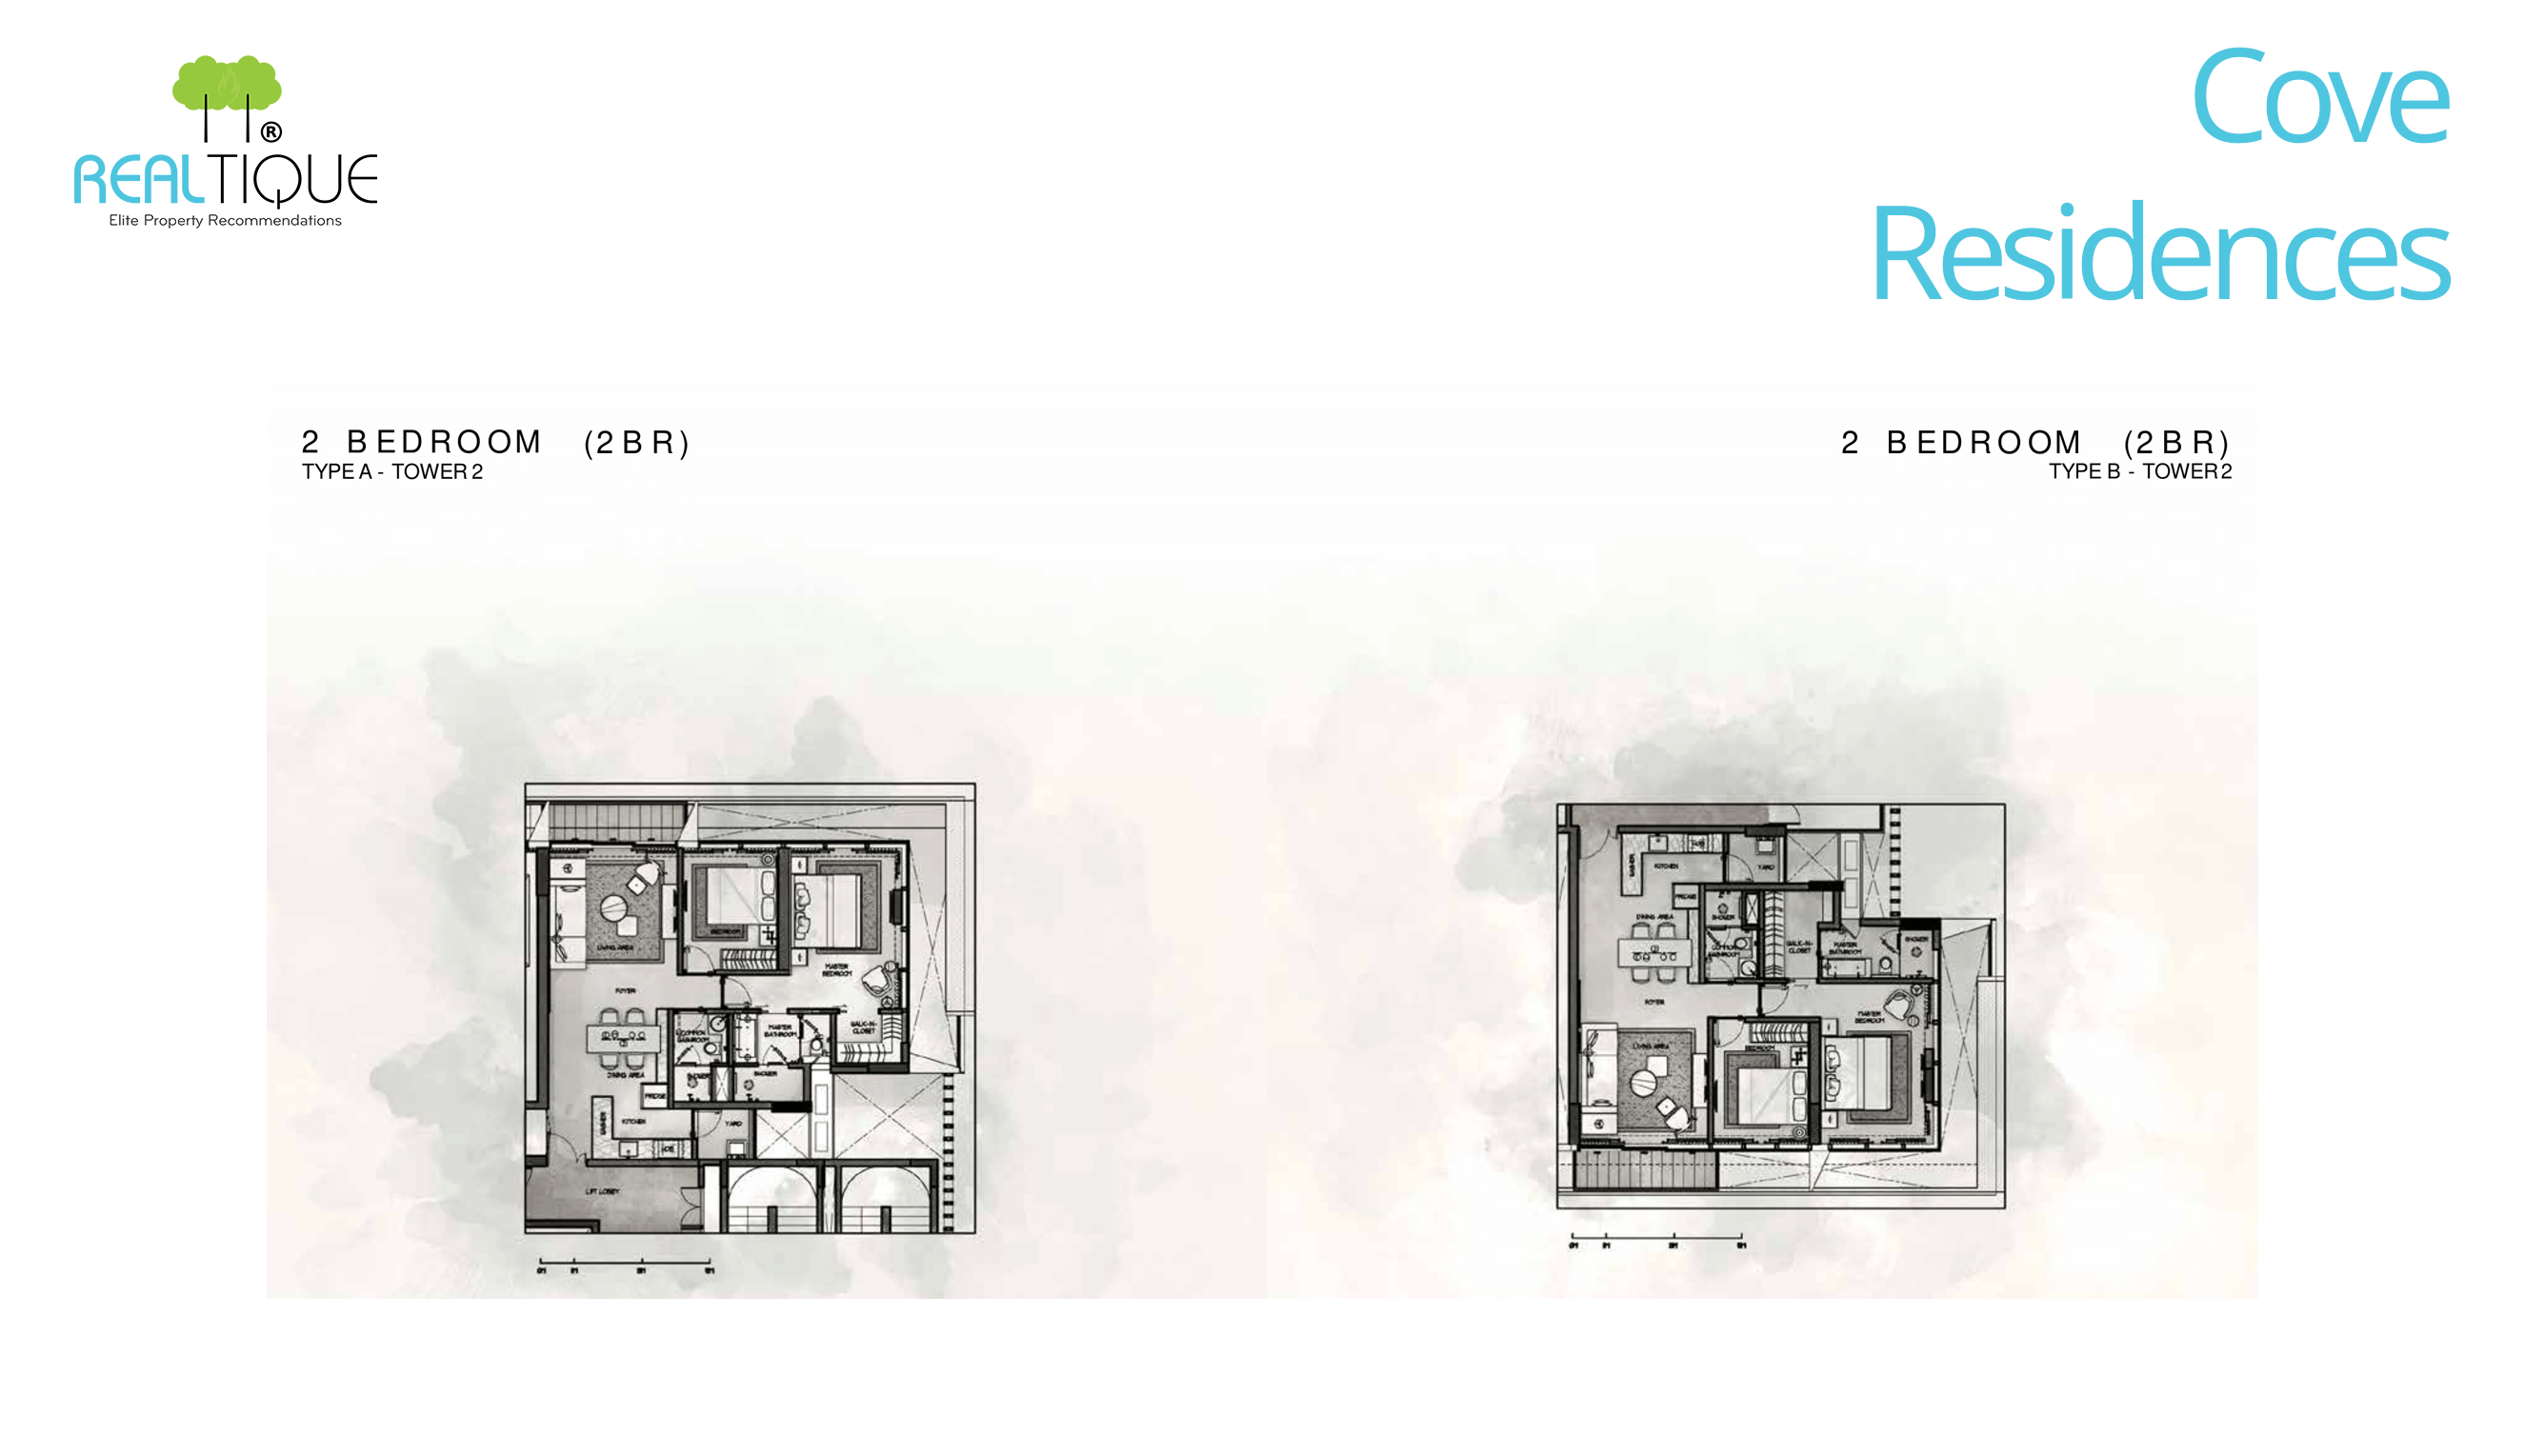 2 Bedroom Layout of Cove Residences (MU11)